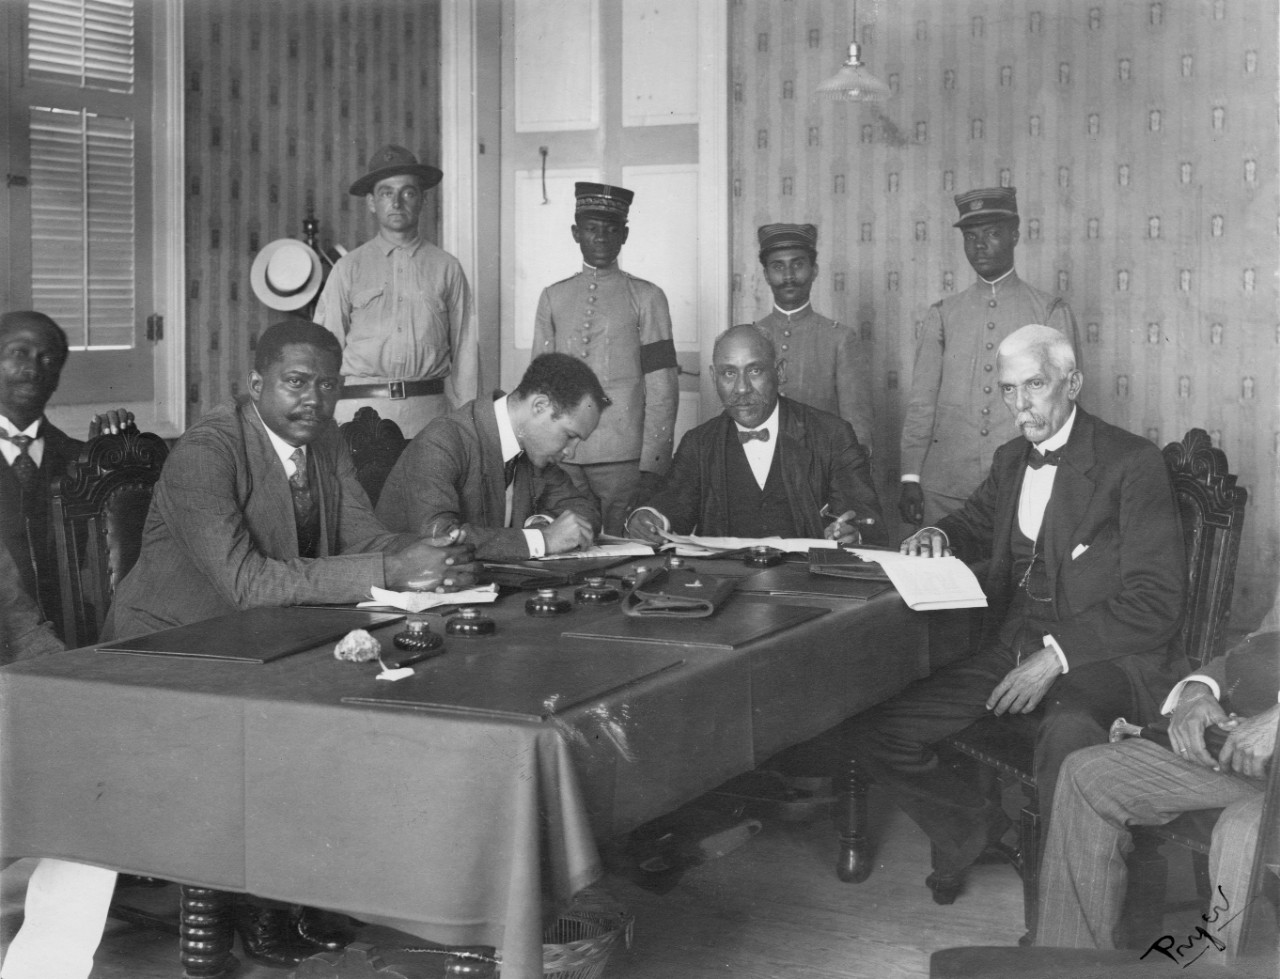 <p>NHF-038-E.17 President Dartiguenave and some of the ministers at the presidents palace November 1915, Haitian Campaign</p>
